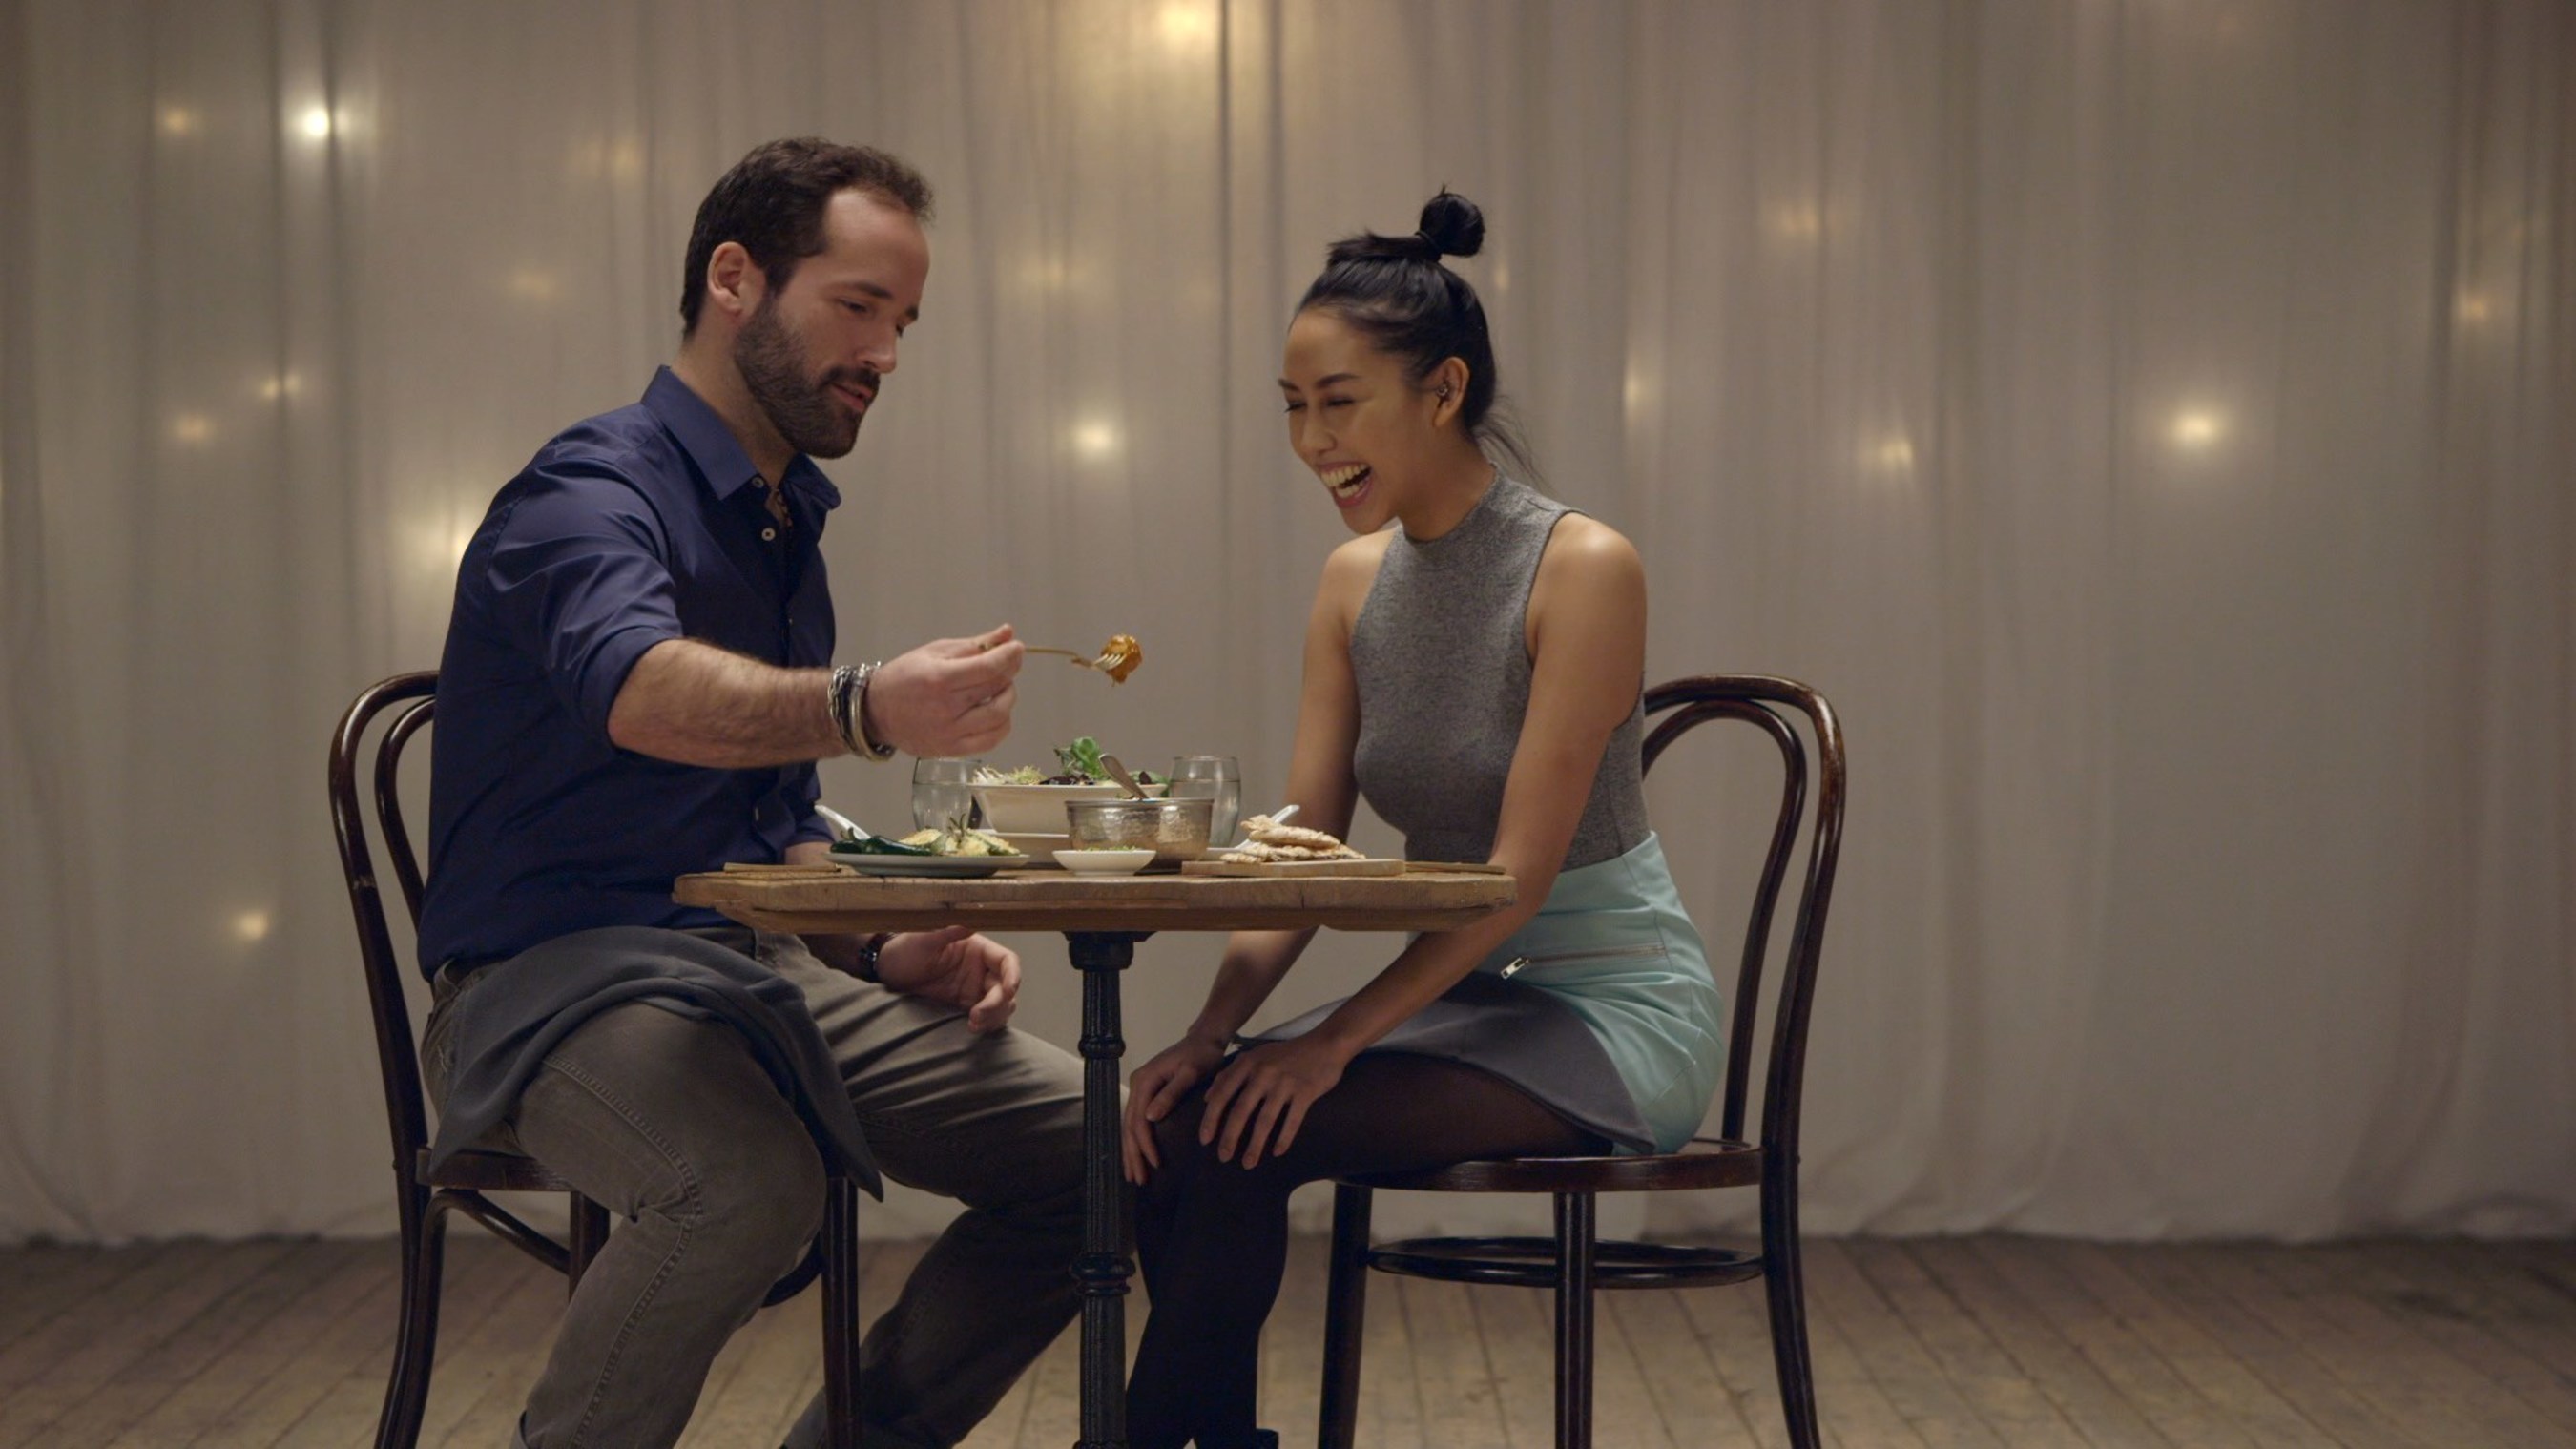 Couples were matched by flavor profiles and asked to feed each other.